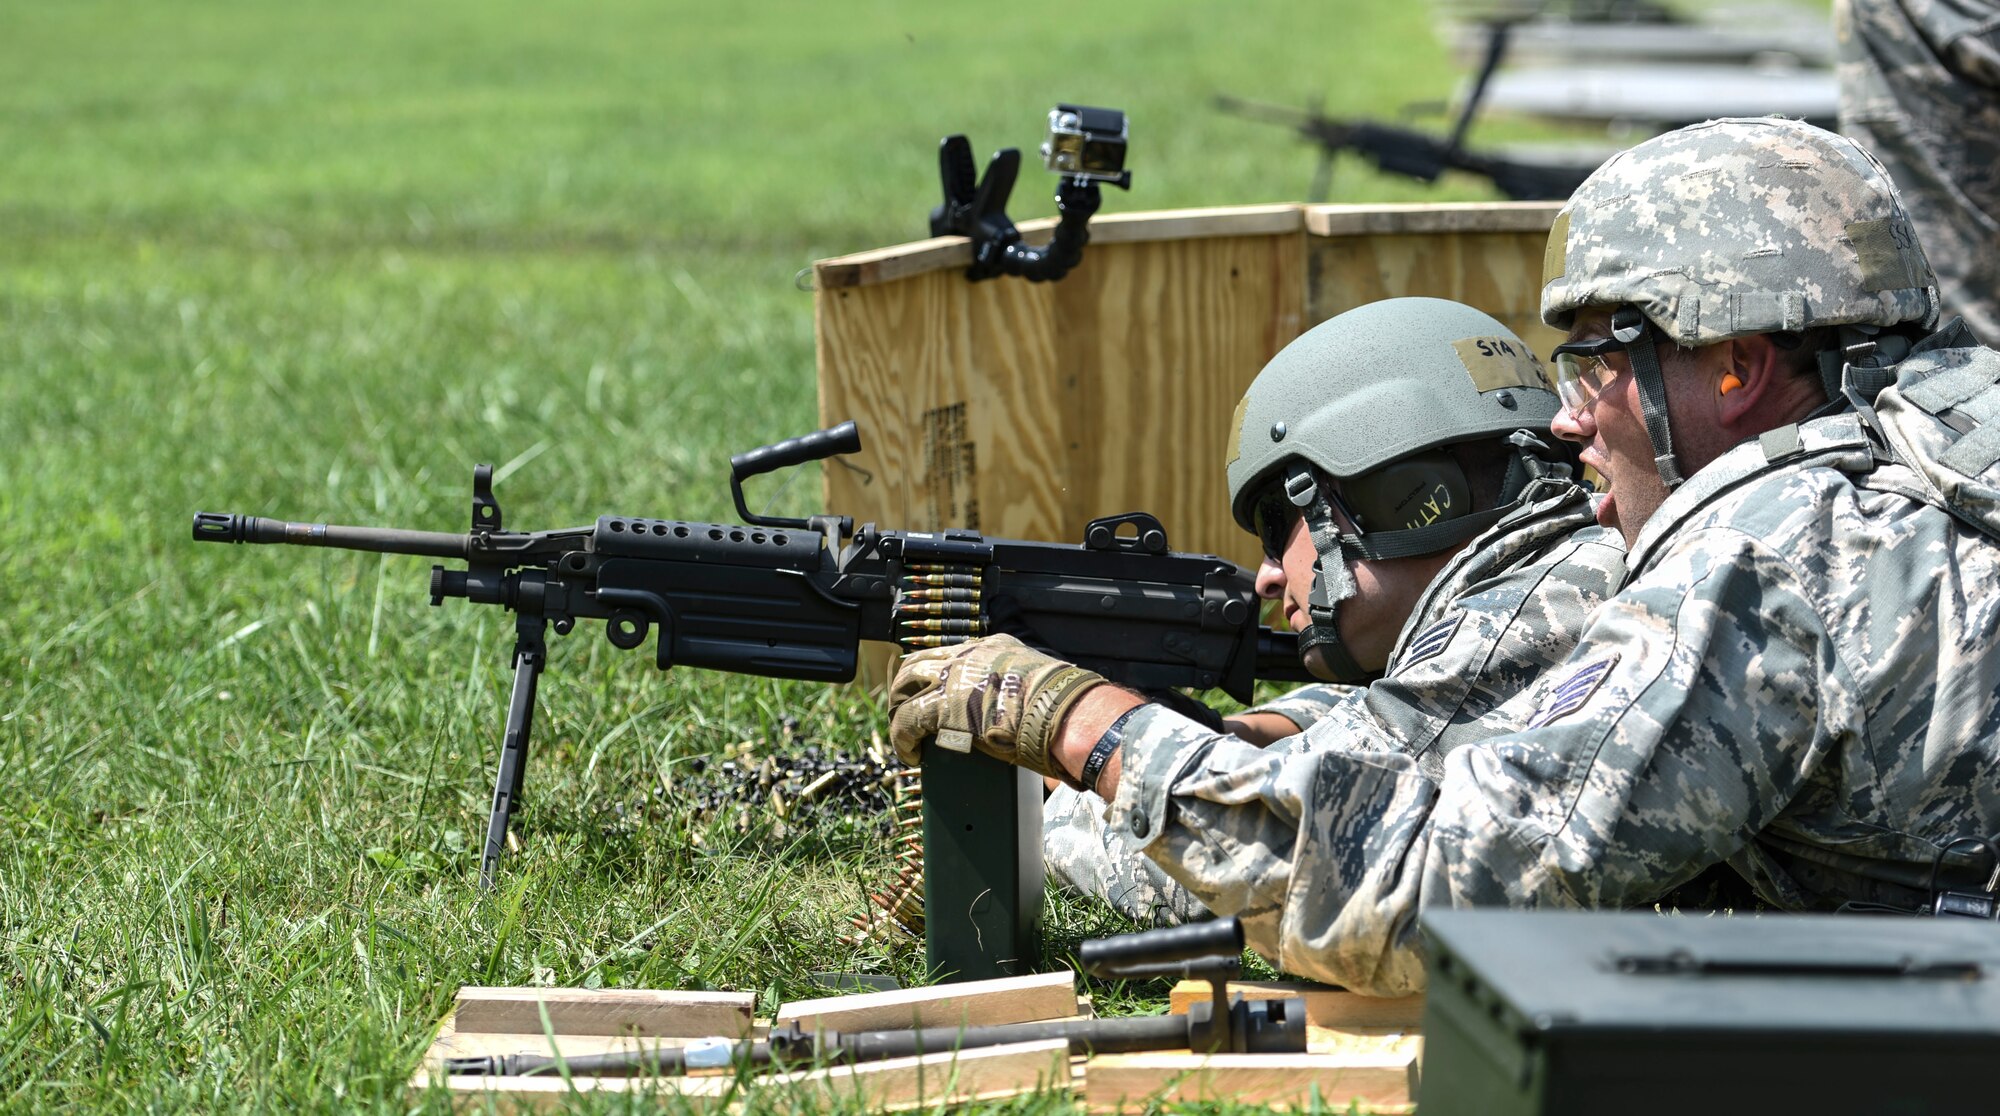 U.S. Air Force Staff Sgt. Cory Walker, Security Forces Specialist with the 171st Security Forces Squadron, located at the 171st Air Refueling Wing near Pittsburgh, assists U.S. Air Force Senior Airman Nicholas D’Arrigo during a weapons qualification at Camp Dawson, W. Va., Aug. 6, 2018. Guardsmen from the 171SFS traveled to Camp Dawson, August 5-8, 2018, to familiarize and qualify on the 240B and 249 machine guns. (U.S. Air National Guard photo by Tech. Sgt. Allyson L. Manners)